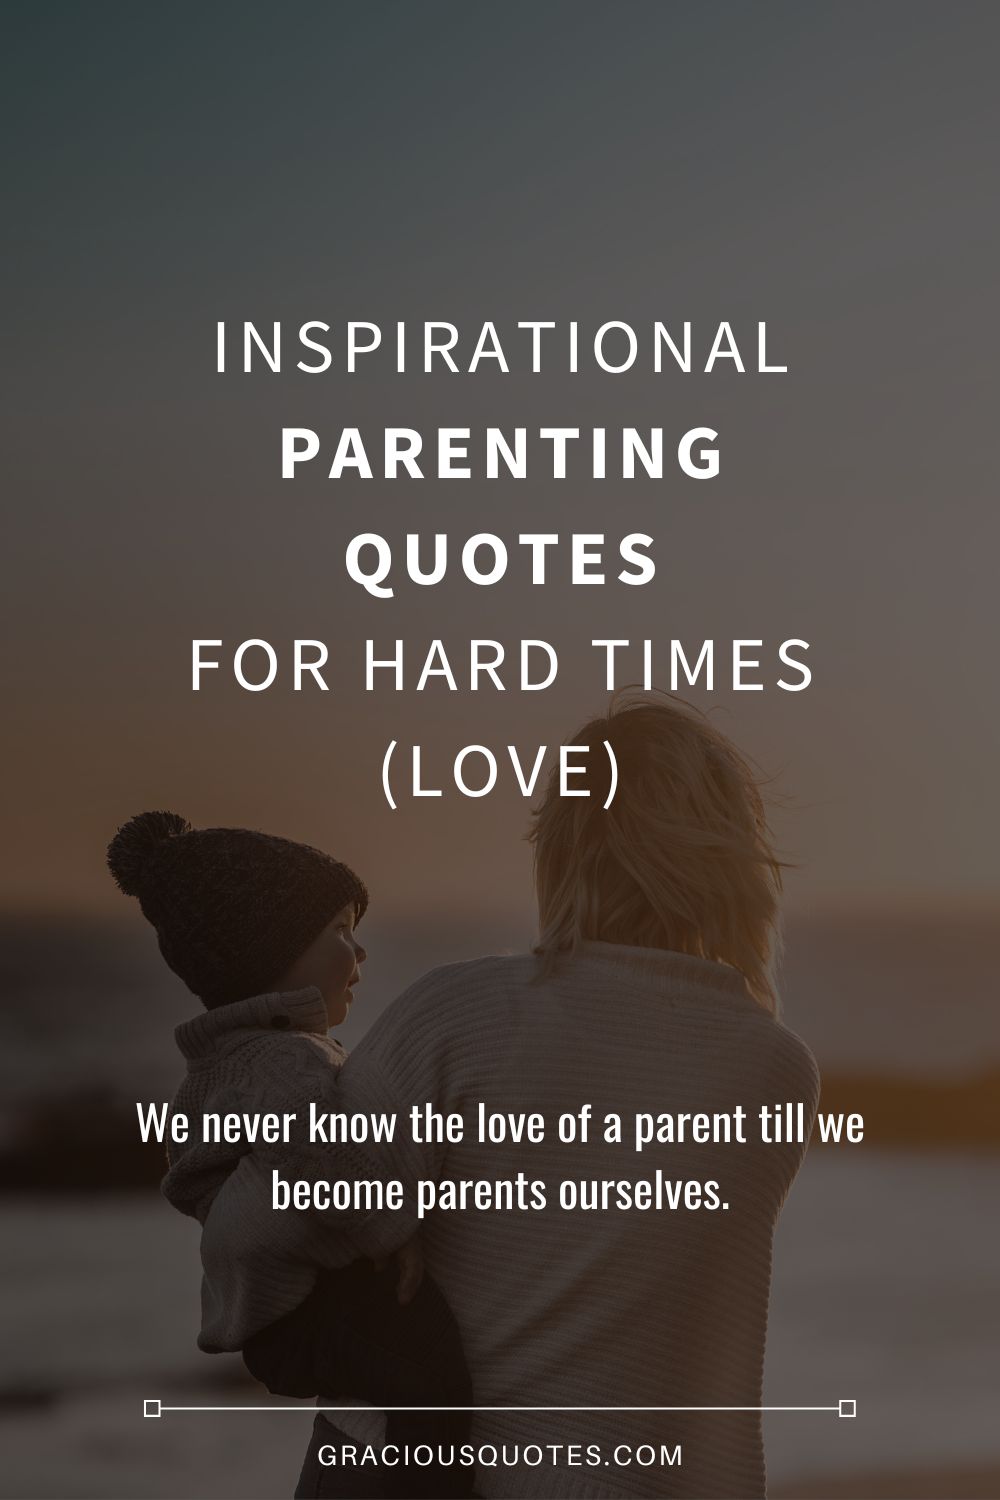 Inspirational Parenting Quotes for Hard Times (LOVE) - Gracious Quotes